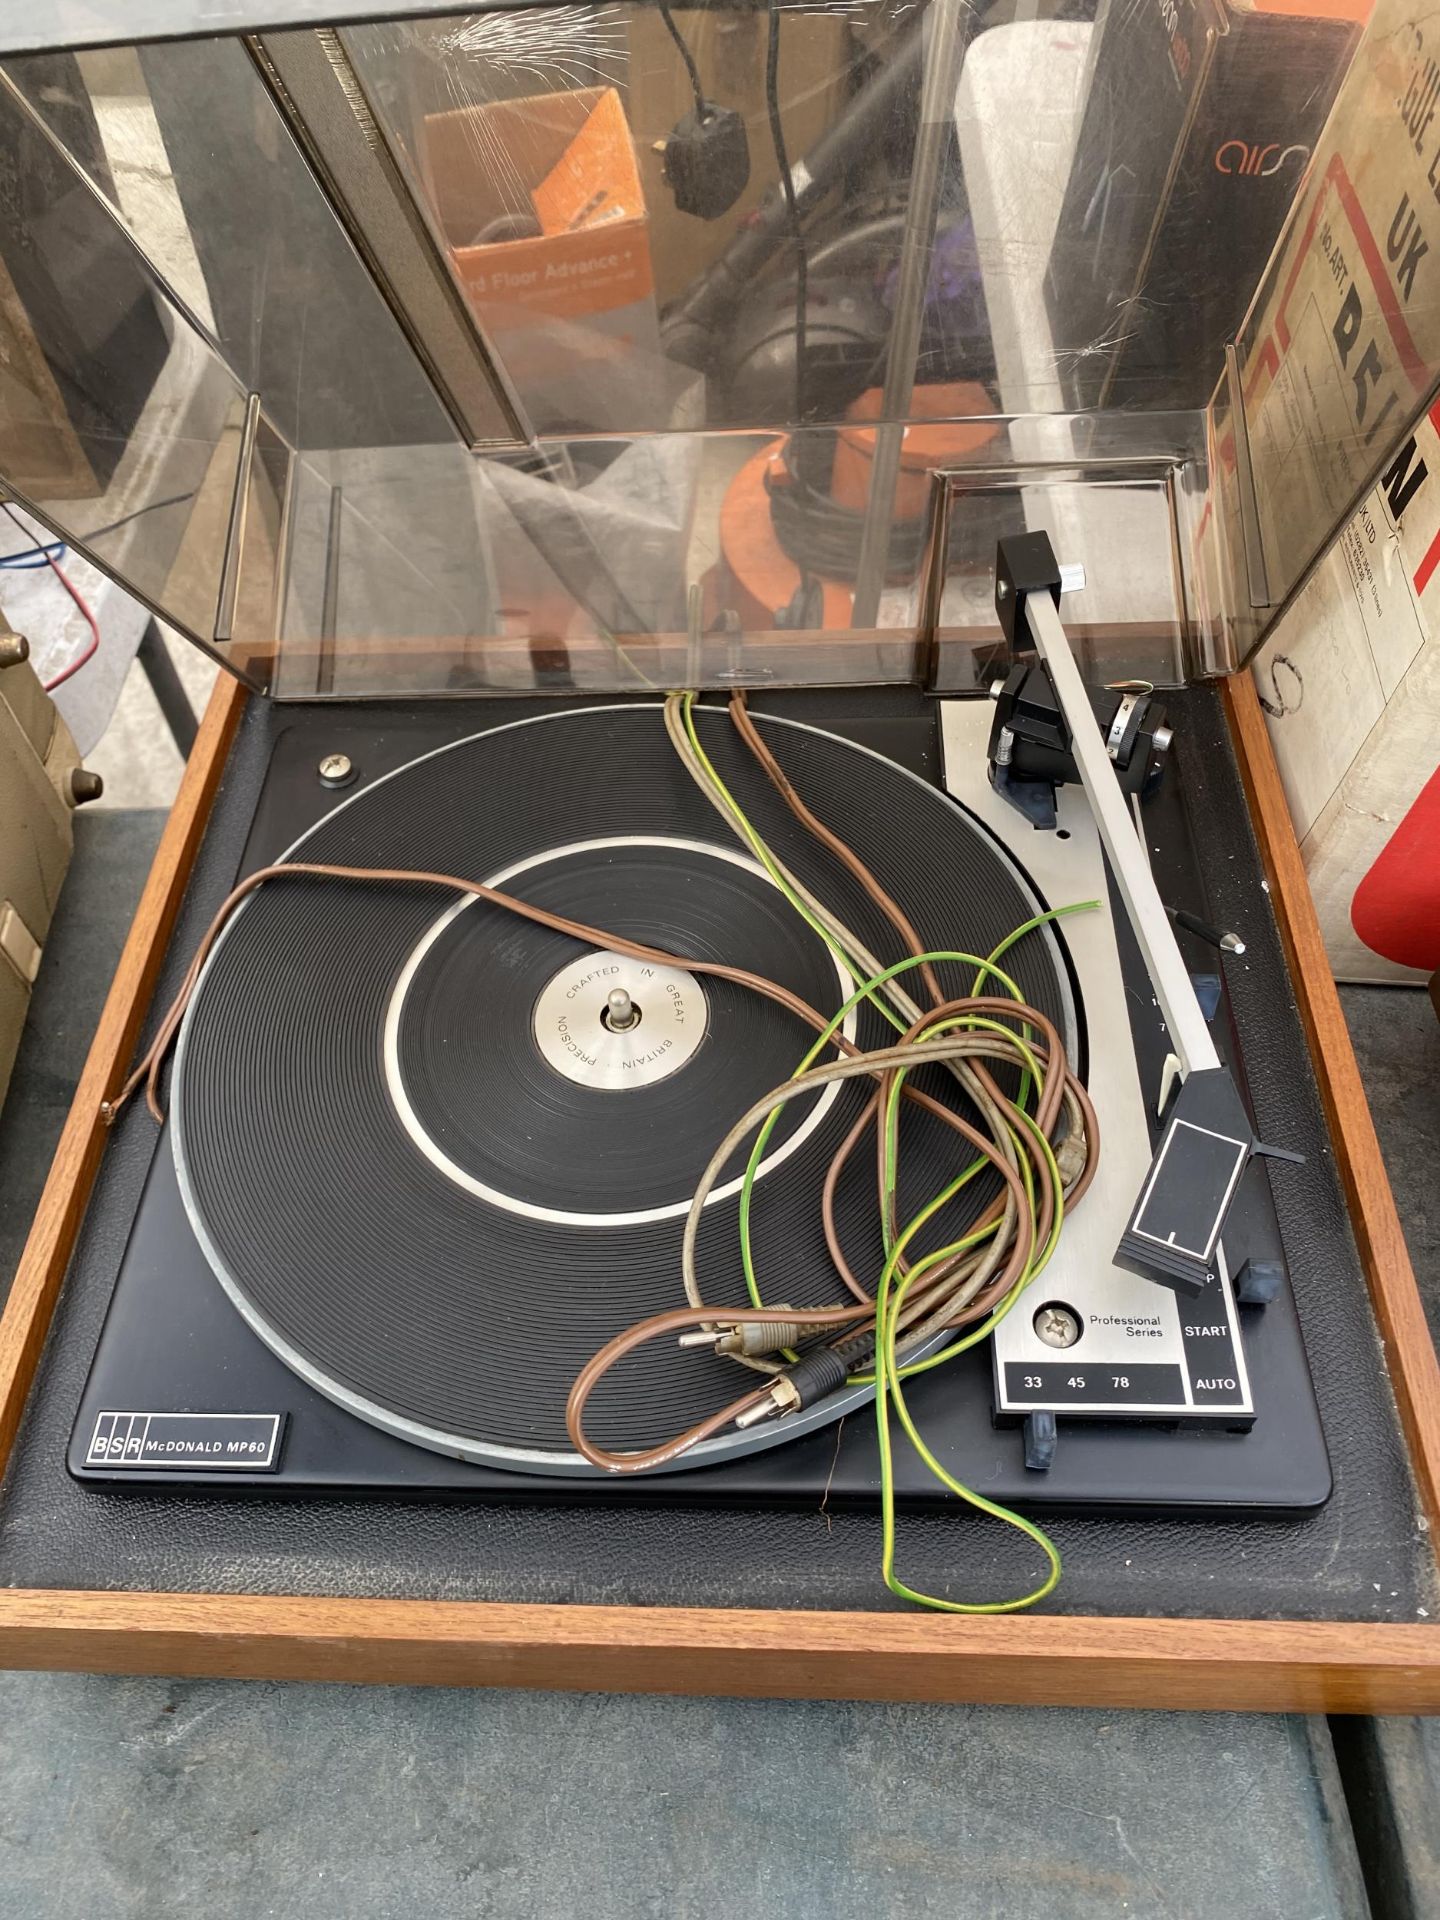 A VINTAGE BSR MCDONALD MP60 RECORD PLAYER - Image 2 of 2